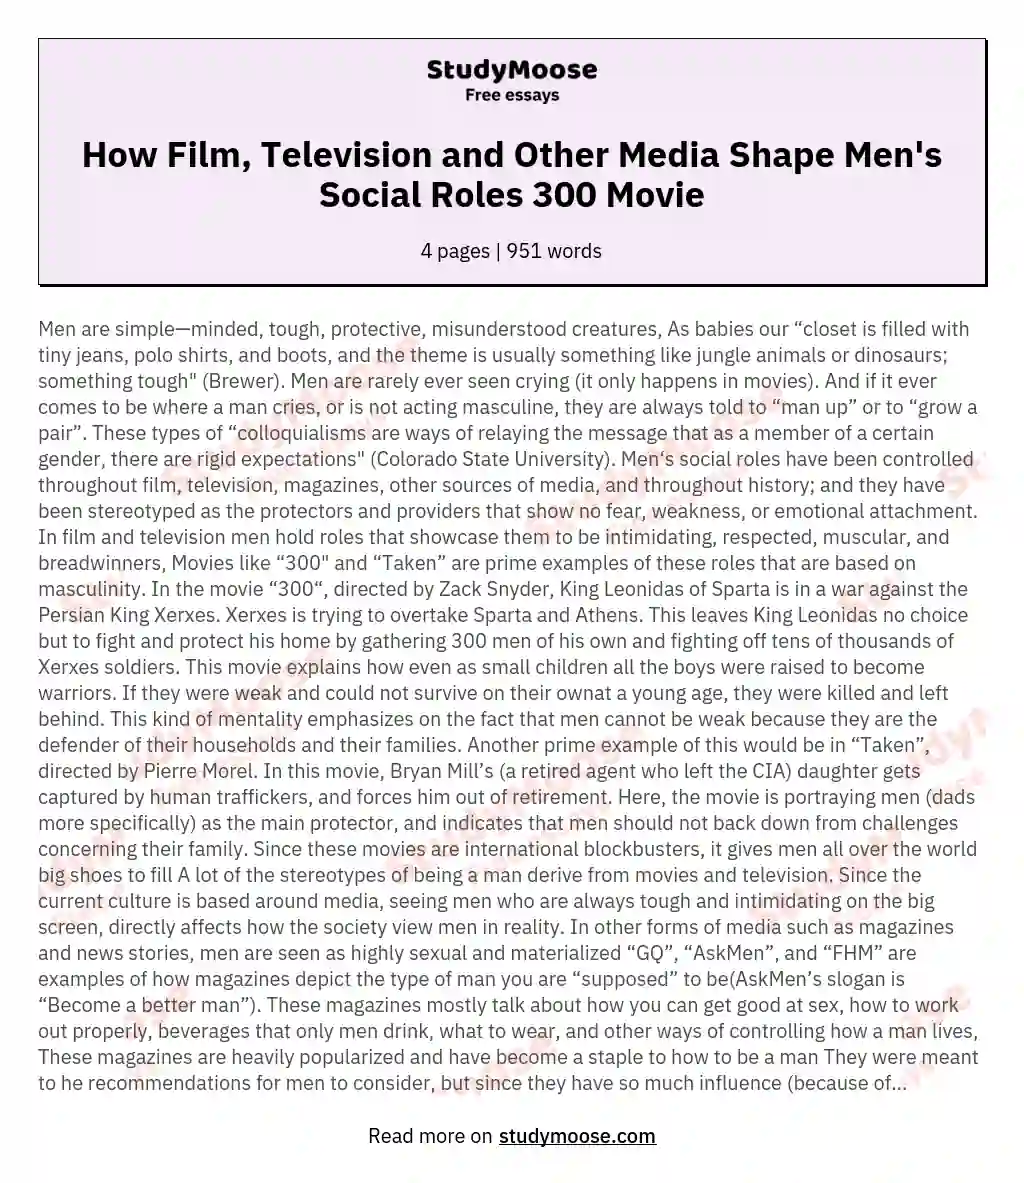 How Film, Television and Other Media Shape Men's Social Roles 300 Movie essay